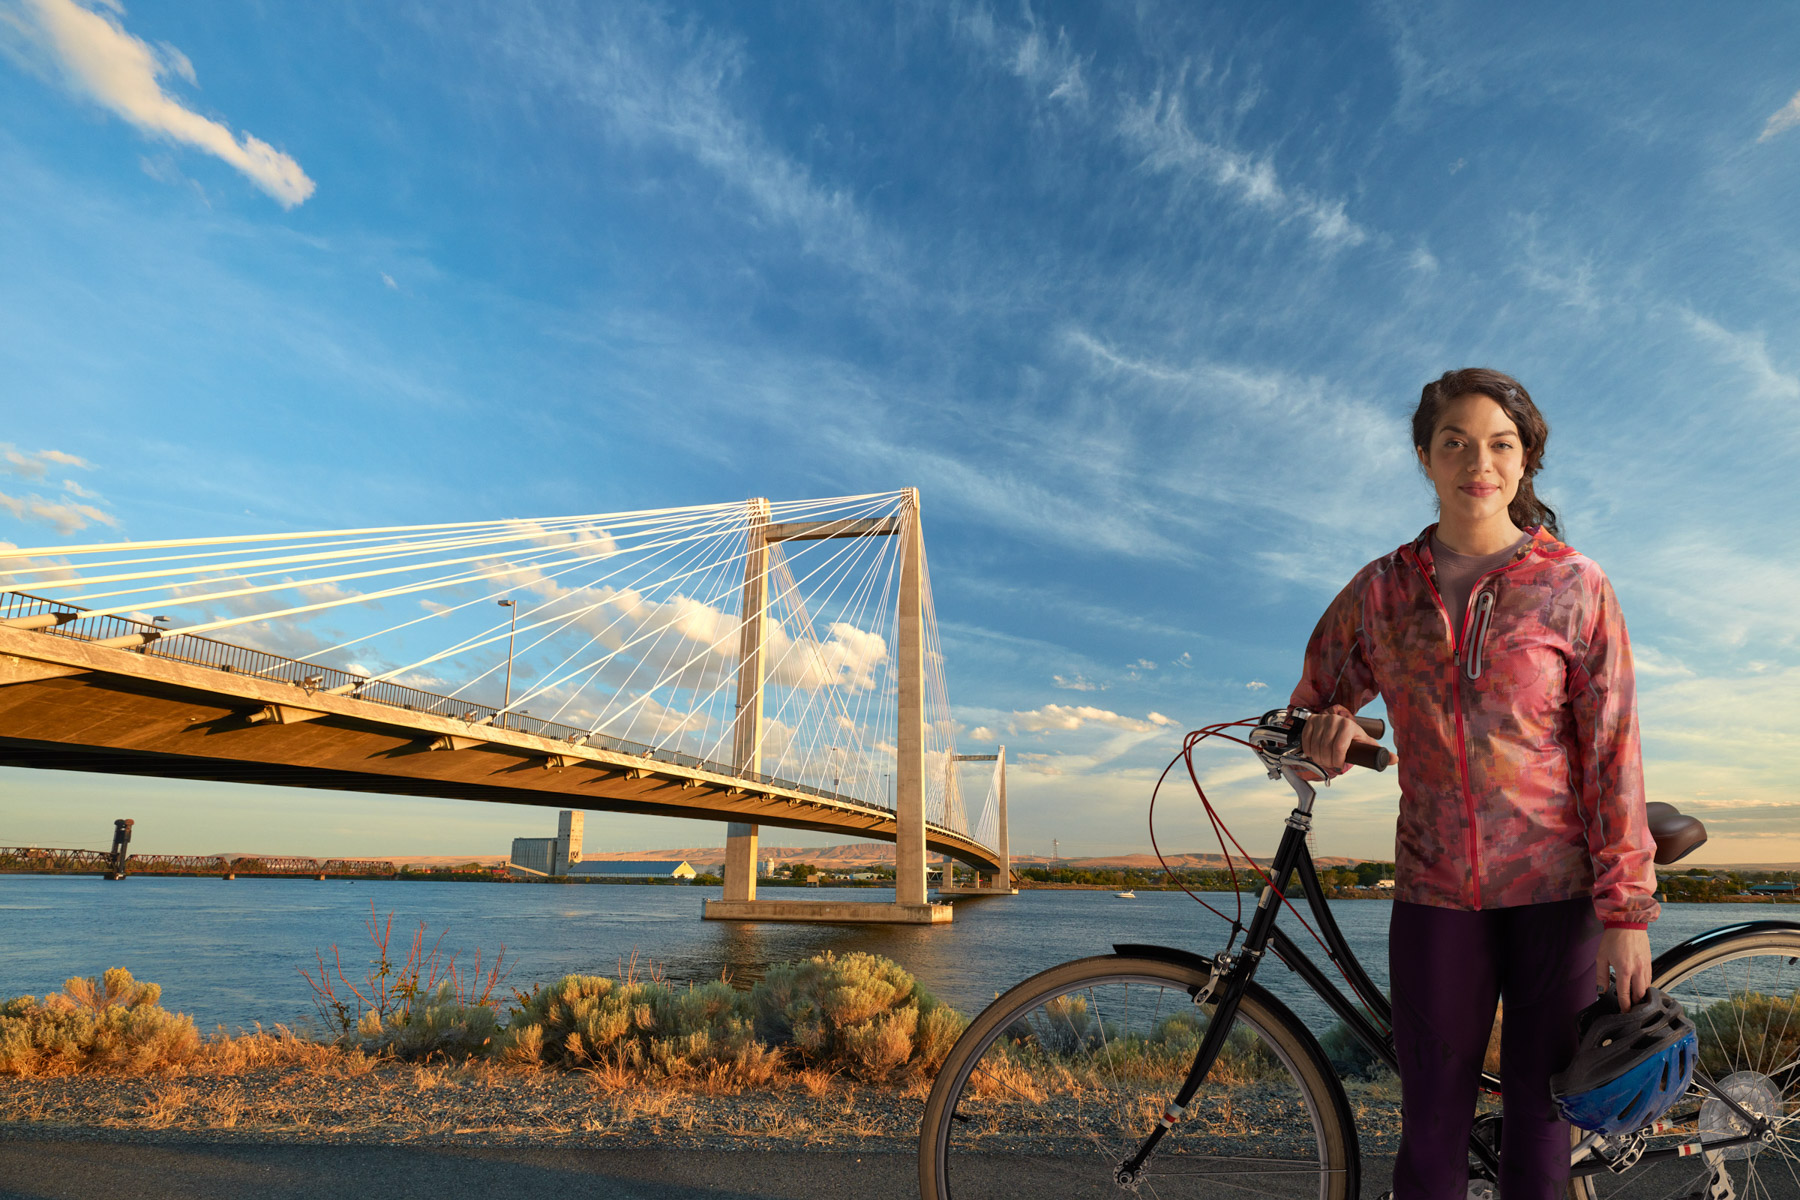 Female cyclist with bike poses in front of cable bridge in Kennewick, Washington